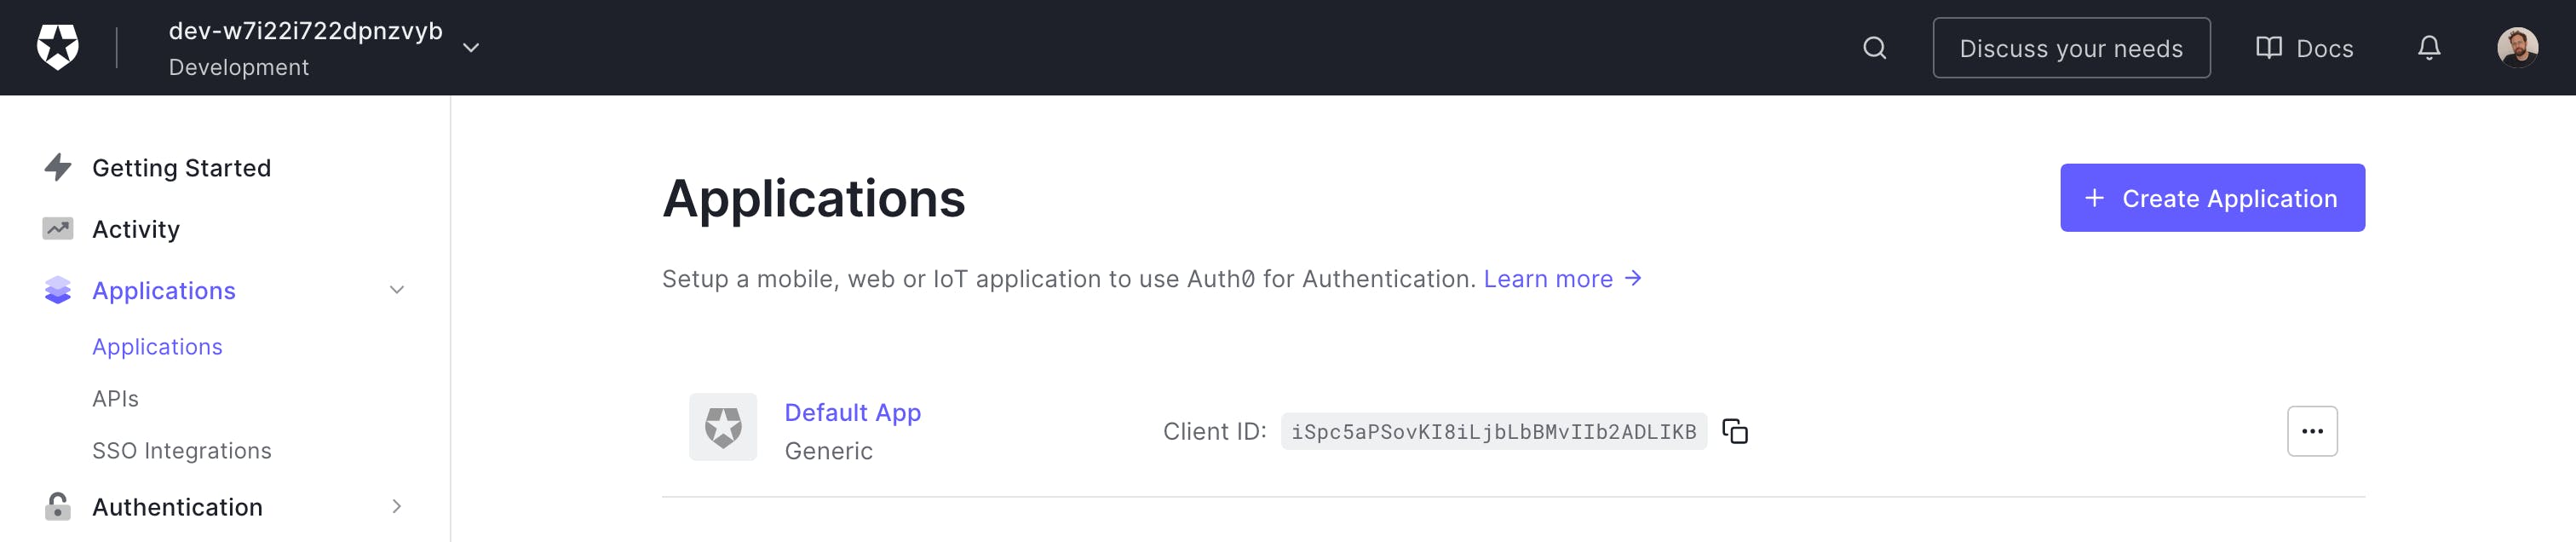 Screenshot of the Applications page on Auth0